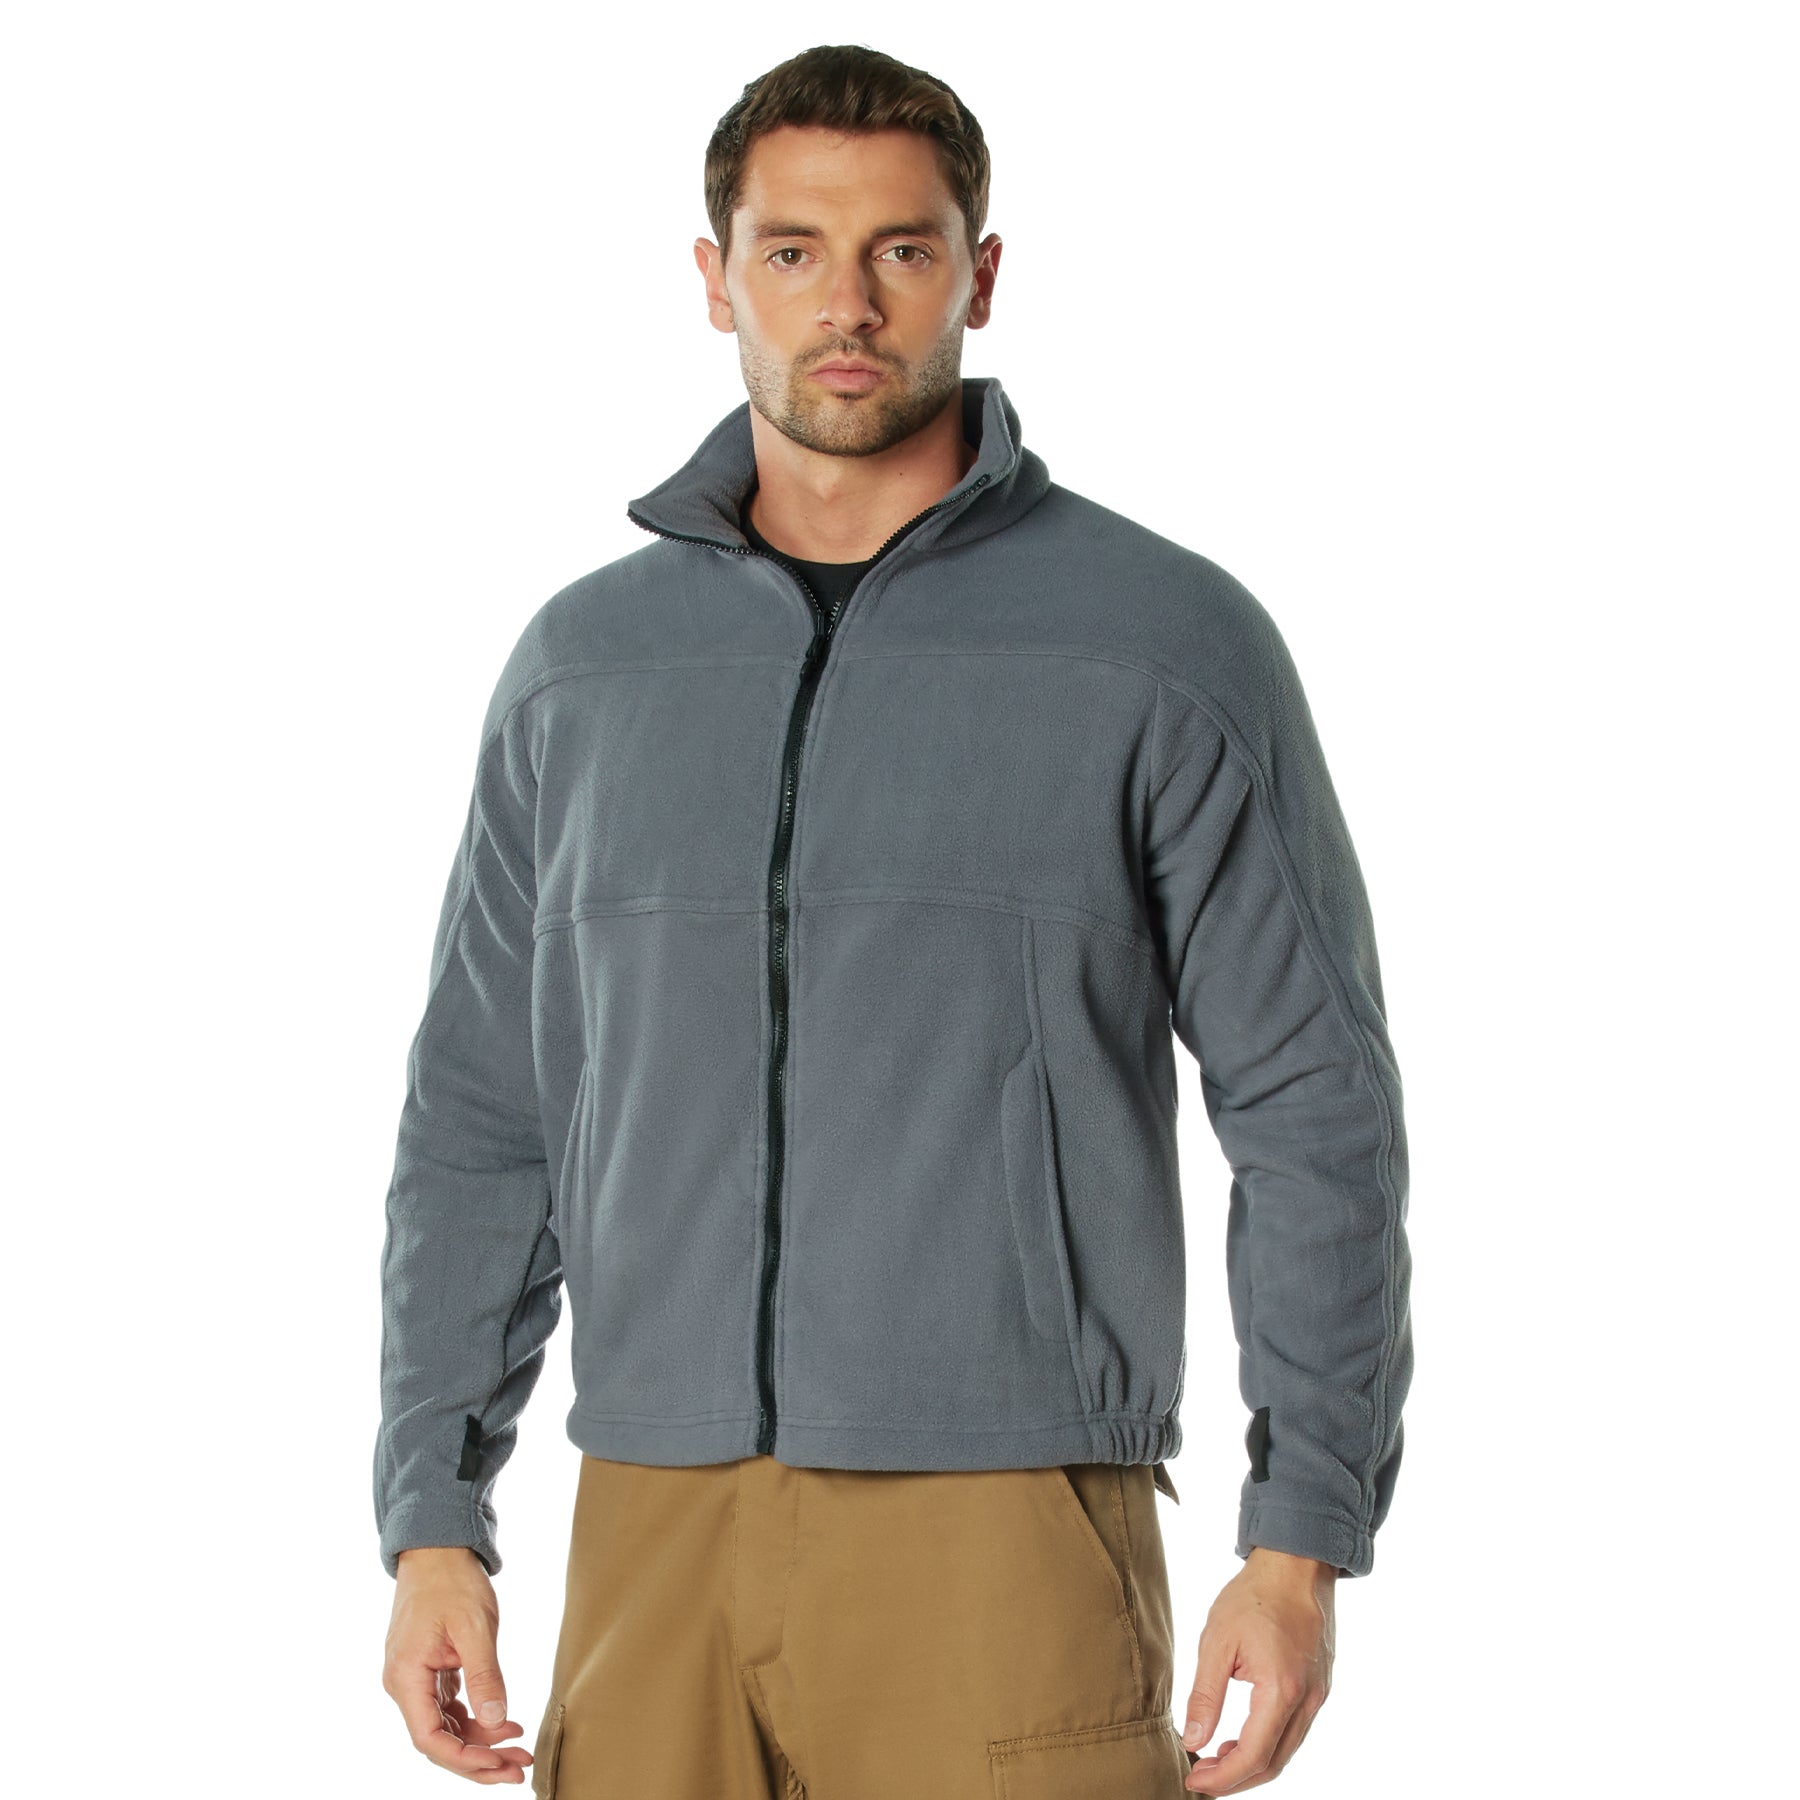 Nylon All Weather 3-In-1 Jackets